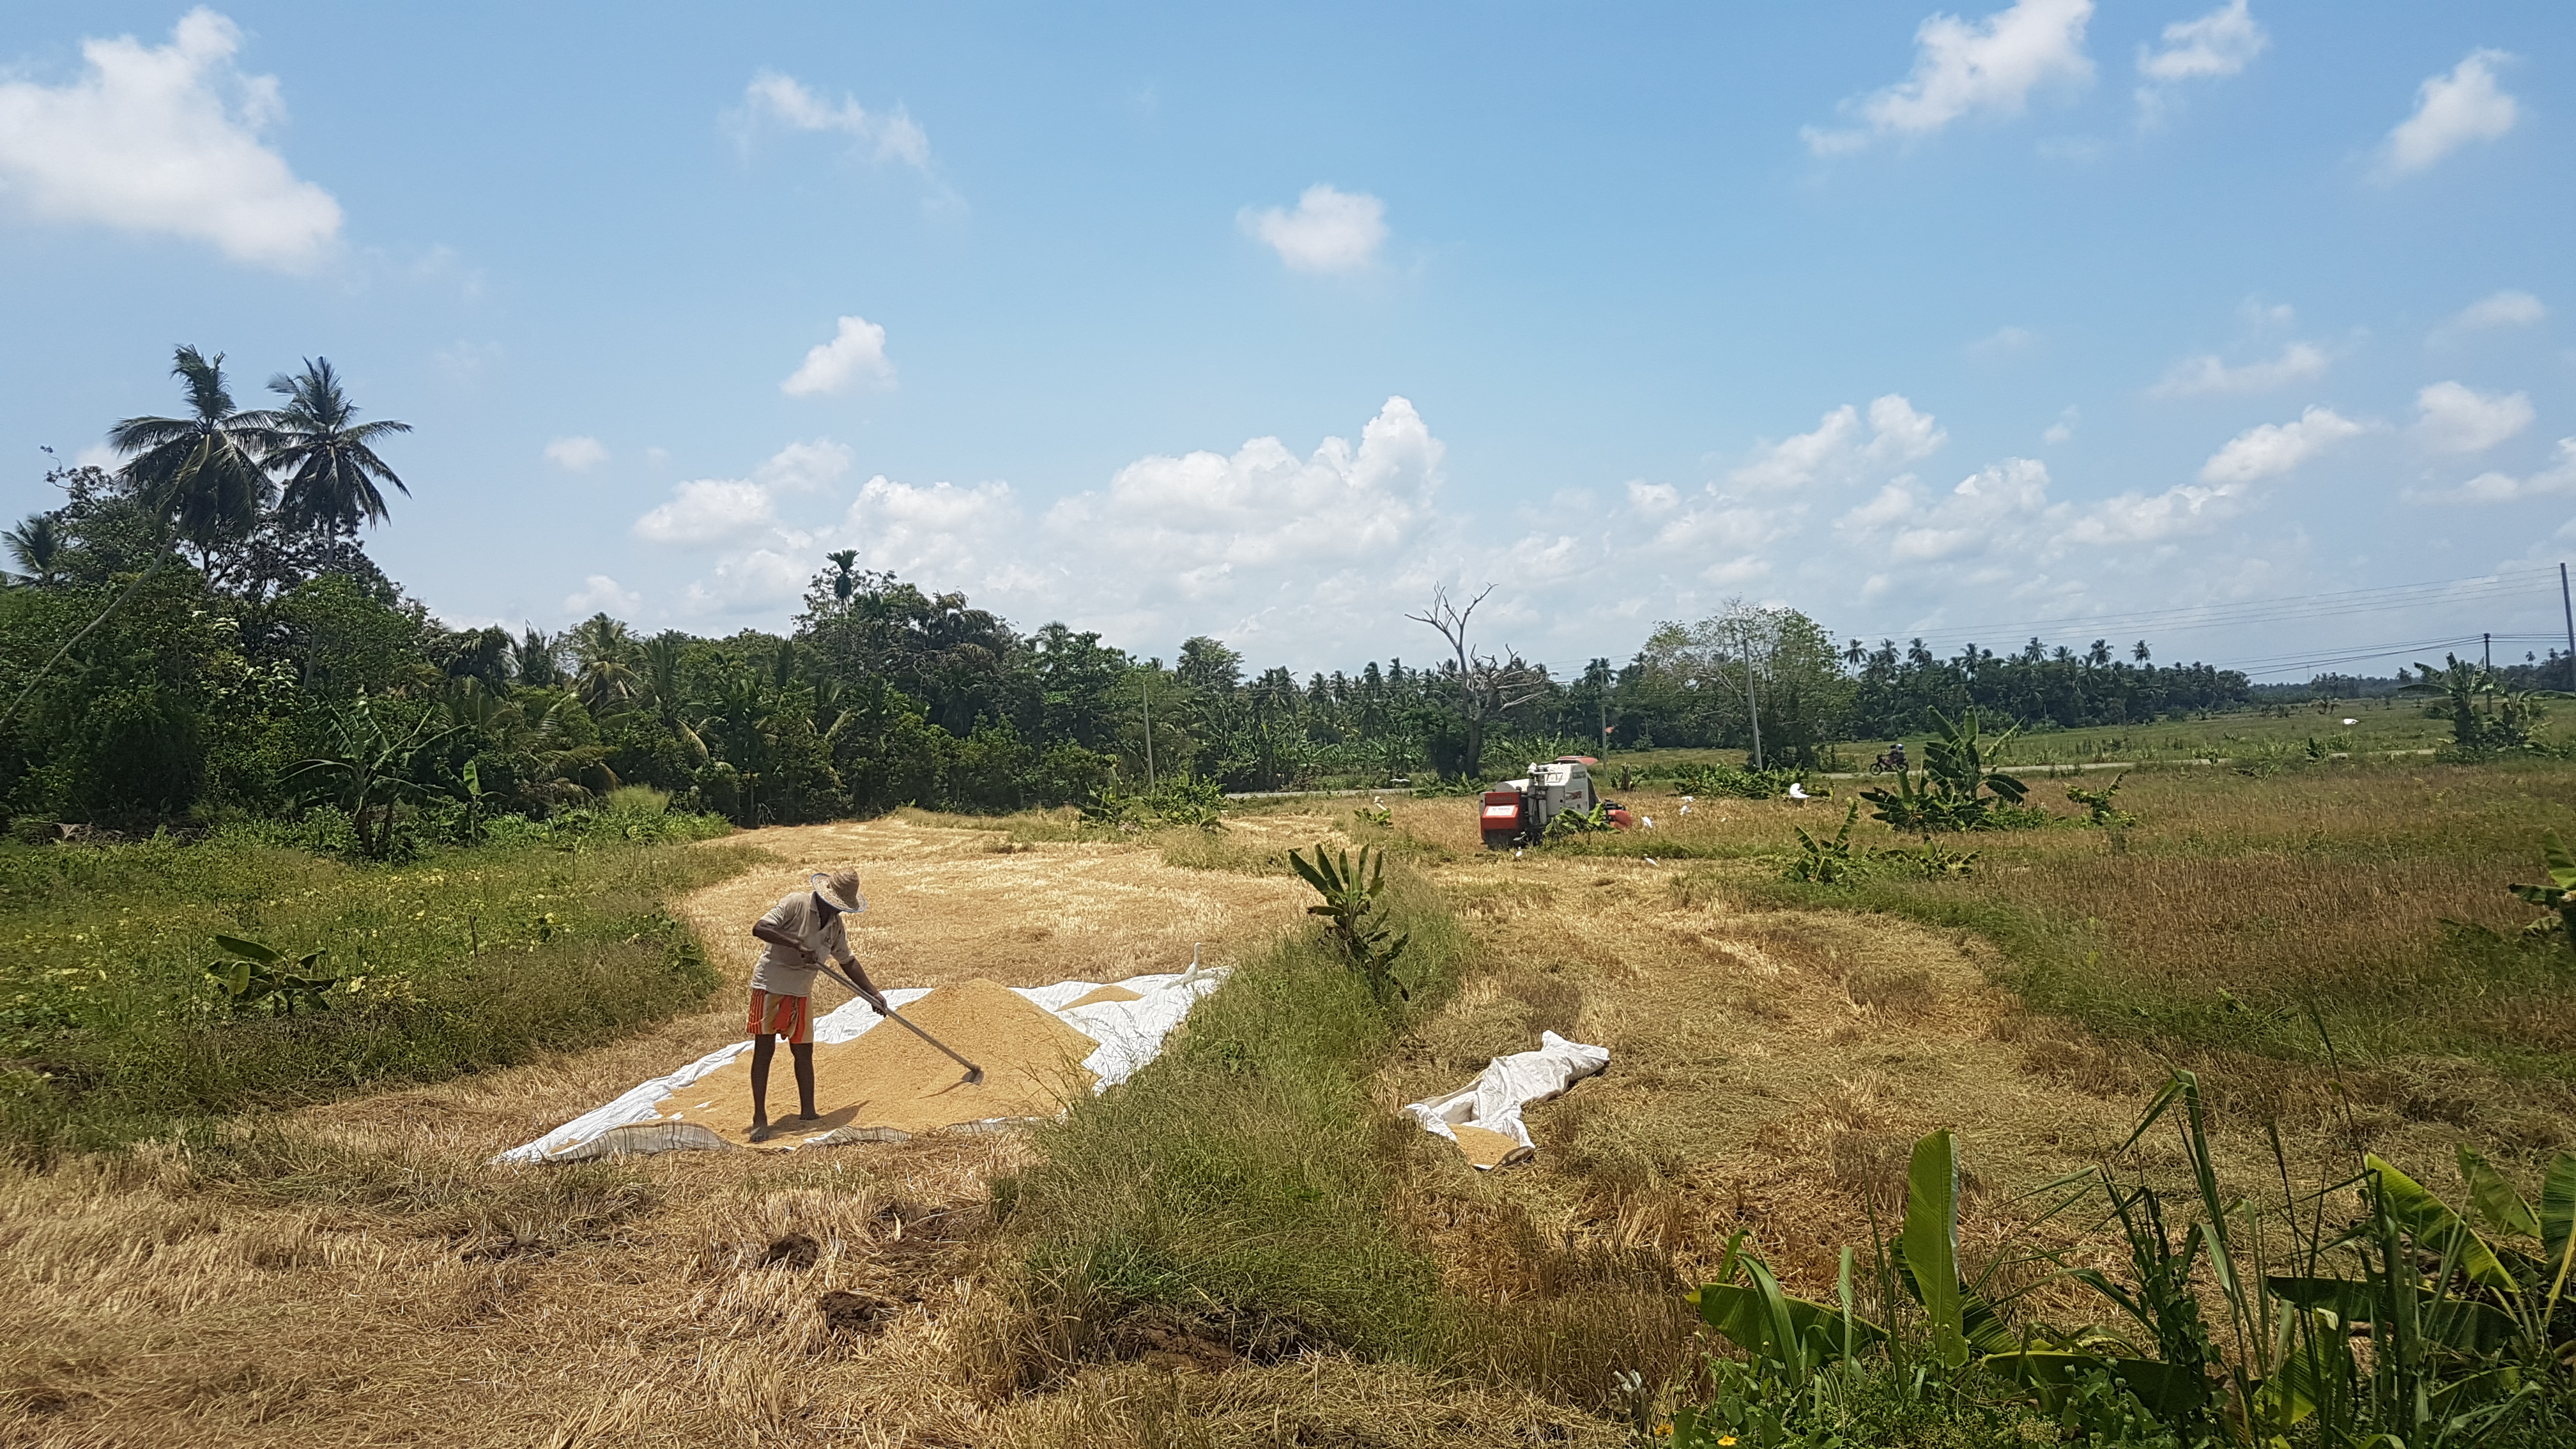 “We managed to get diesel for this harvester just in time. That also, after waiting in queues for days. There is a point which the paddy ripens too much. If we had to wait one more day, we would have crossed that mark - it could not have been harvested or processed for consumption.” - Welangahawela, Hambantota